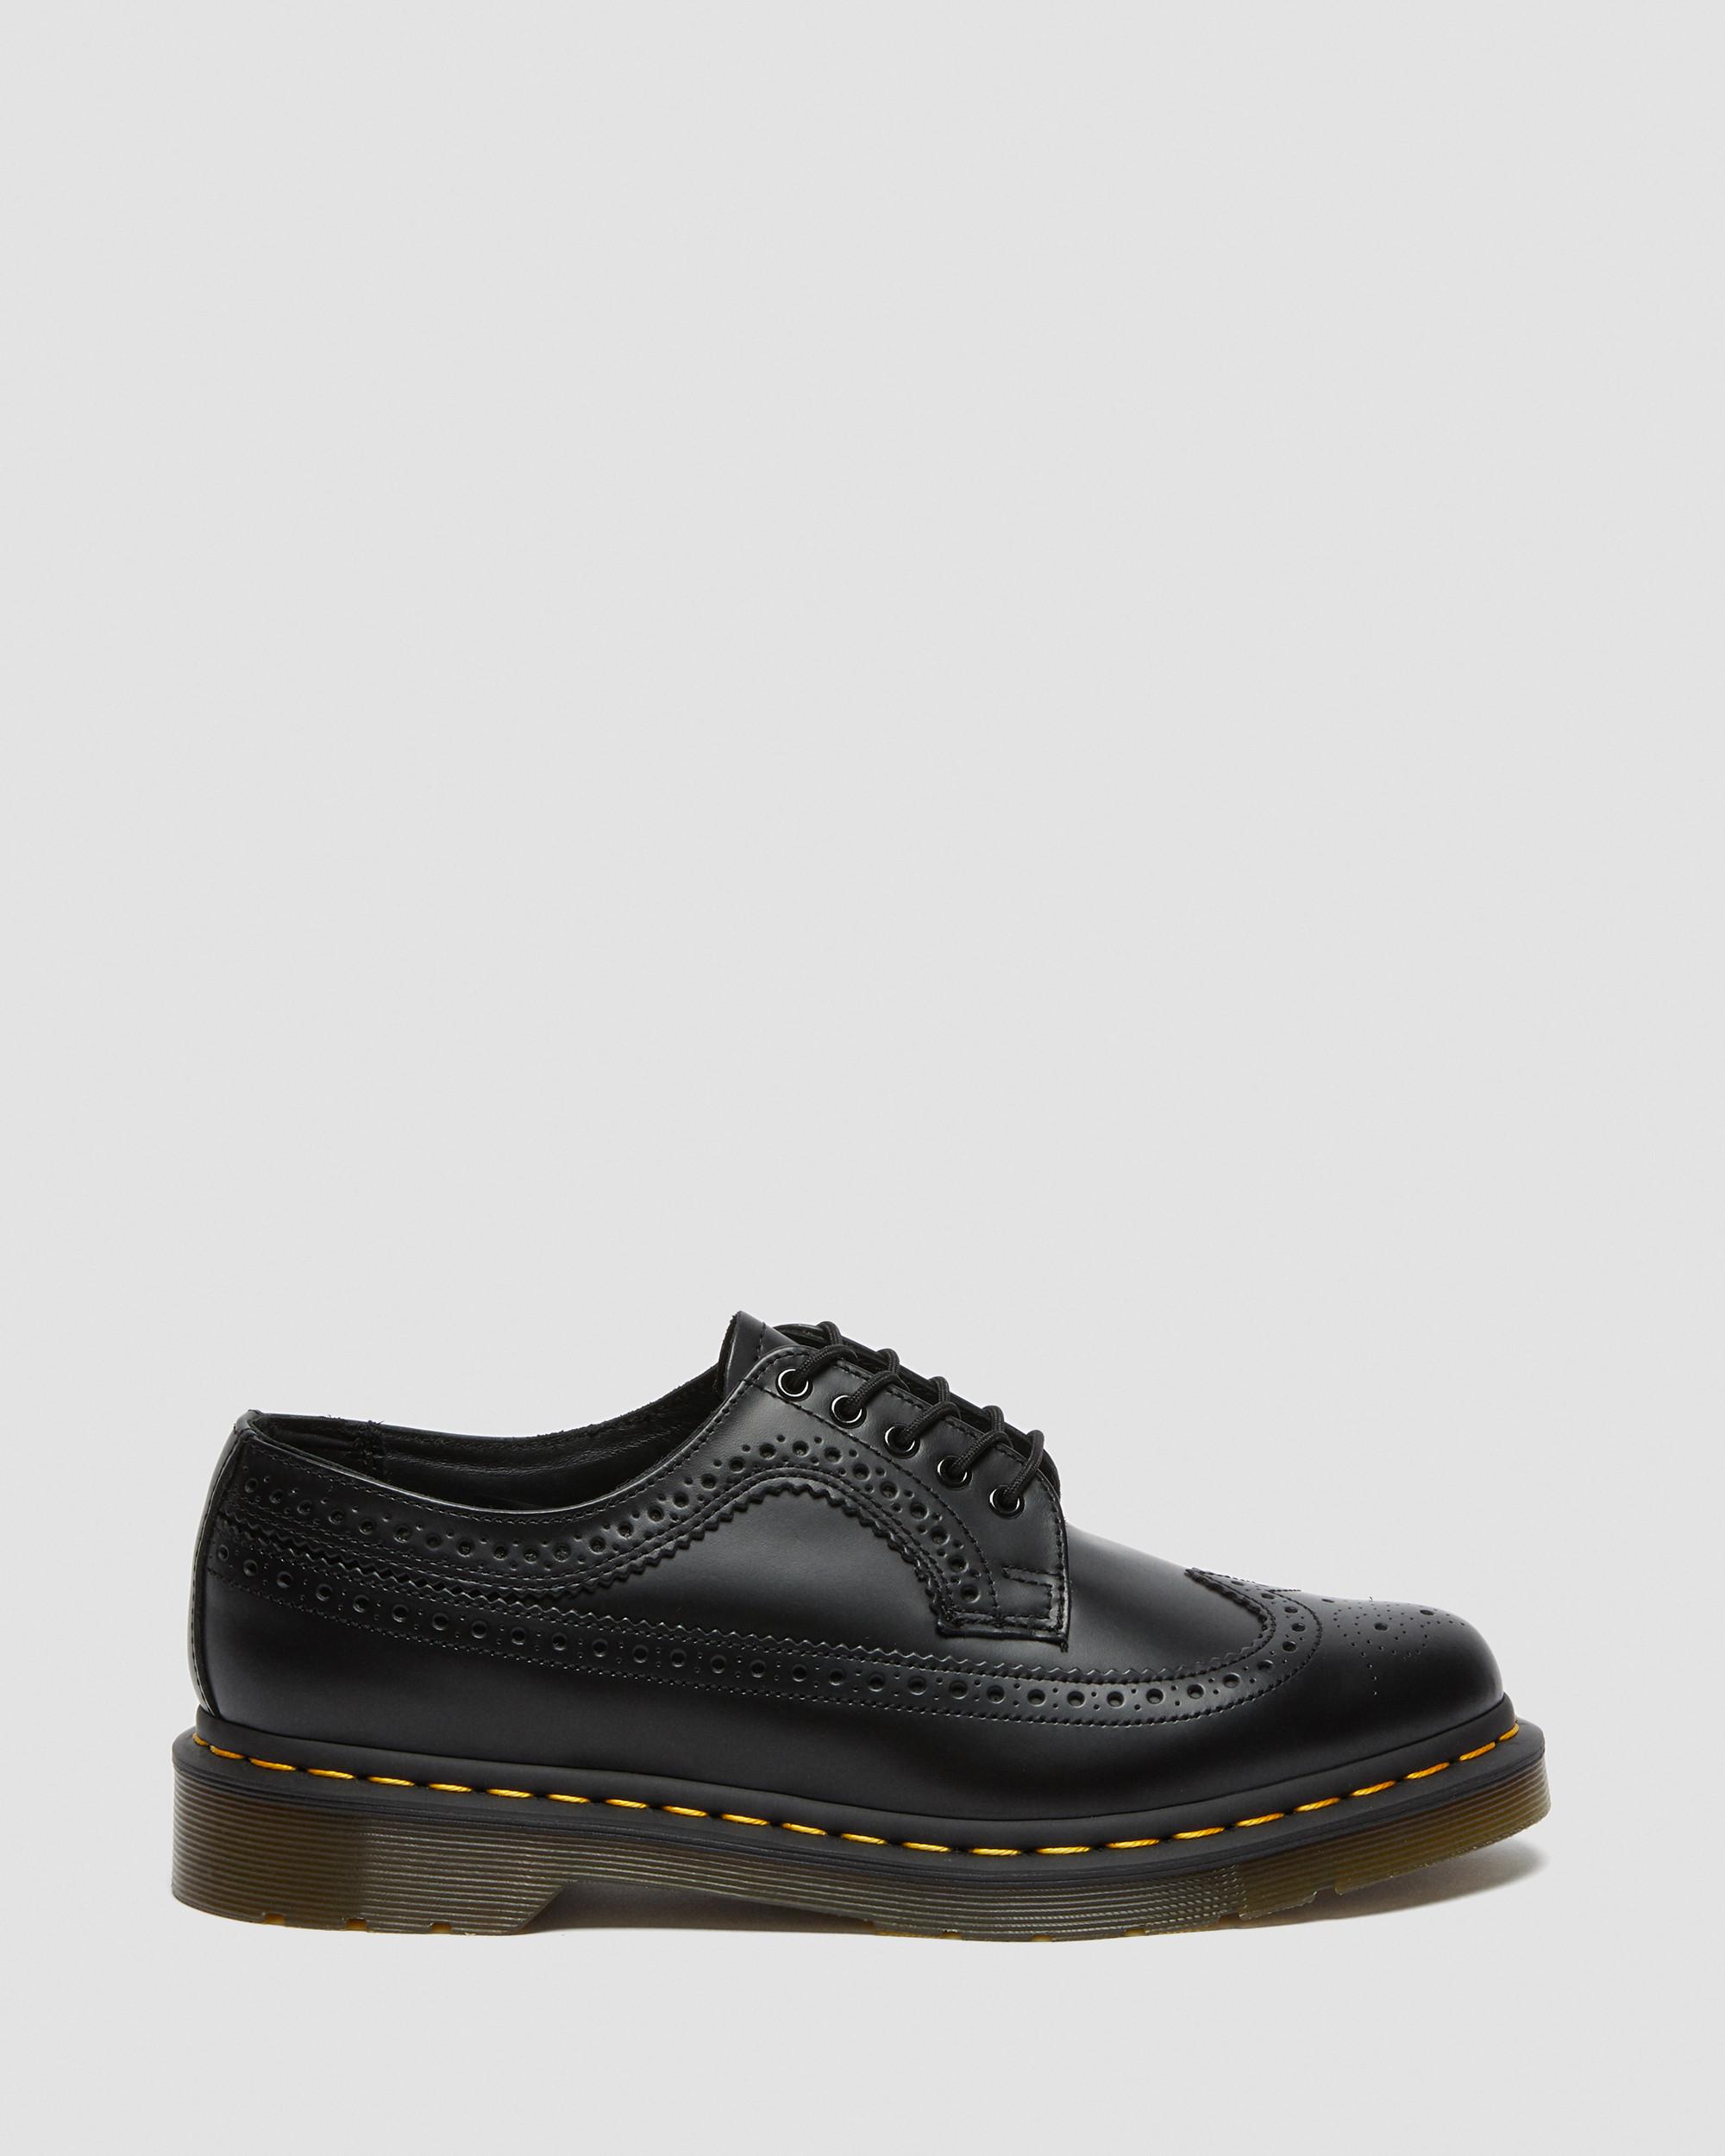 3989 YELLOW STITCH SMOOTH LEATHER BROGUE SHOES | Dr. Martens Official